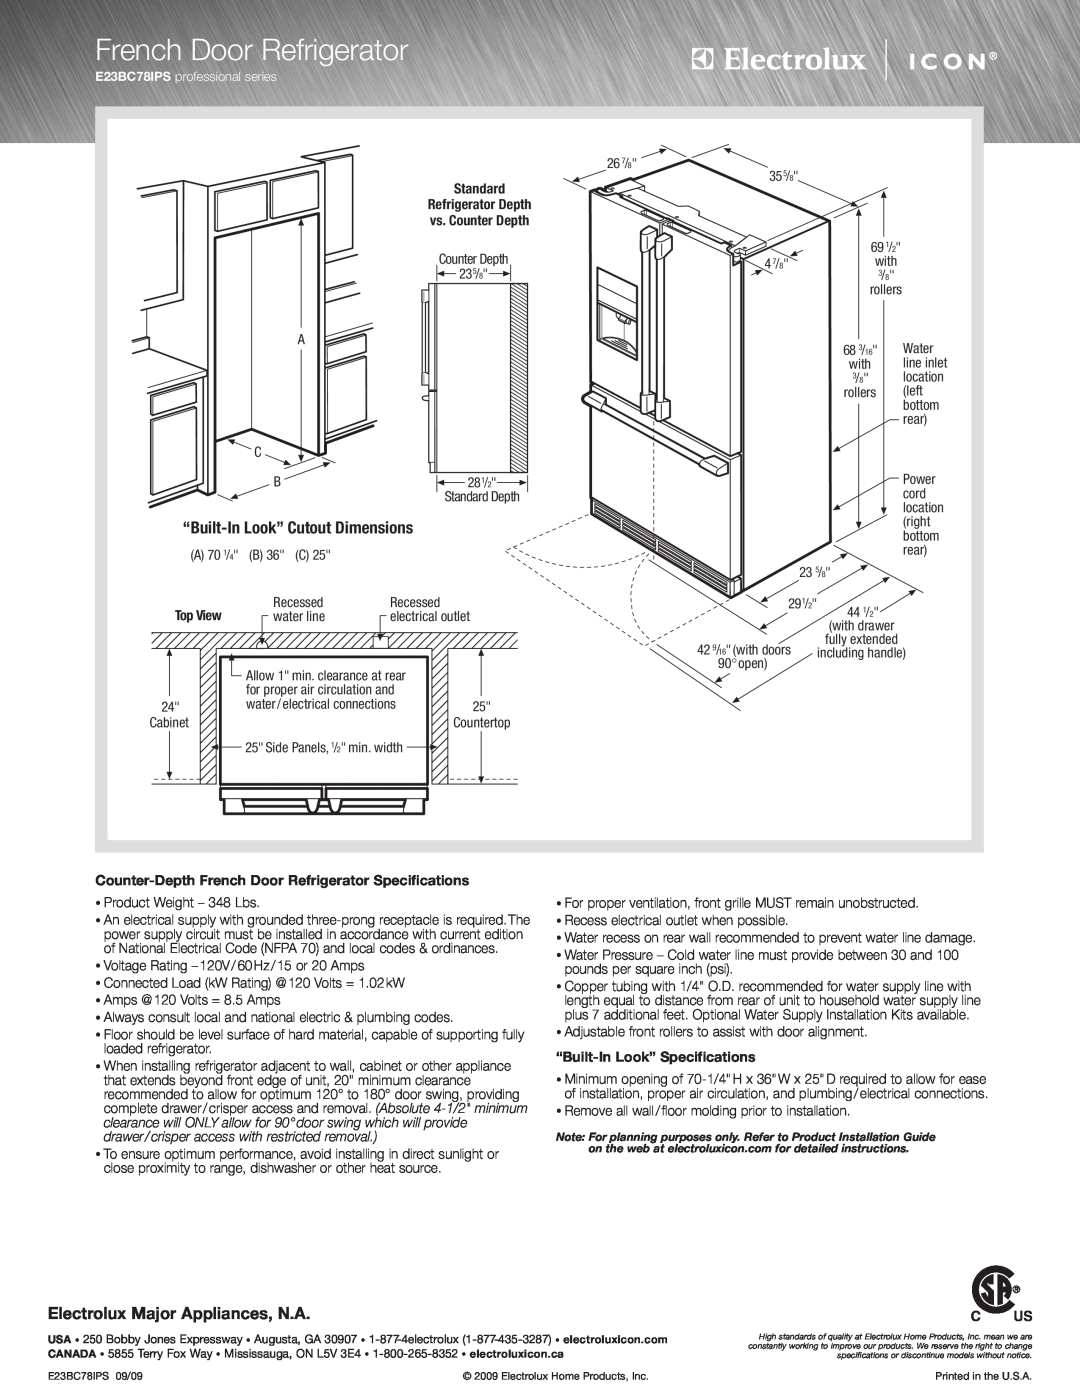 Electrolux E23BC78IPS Standard Refrigerator Depth vs. Counter Depth, Top View, “Built-In Look” Specifications 